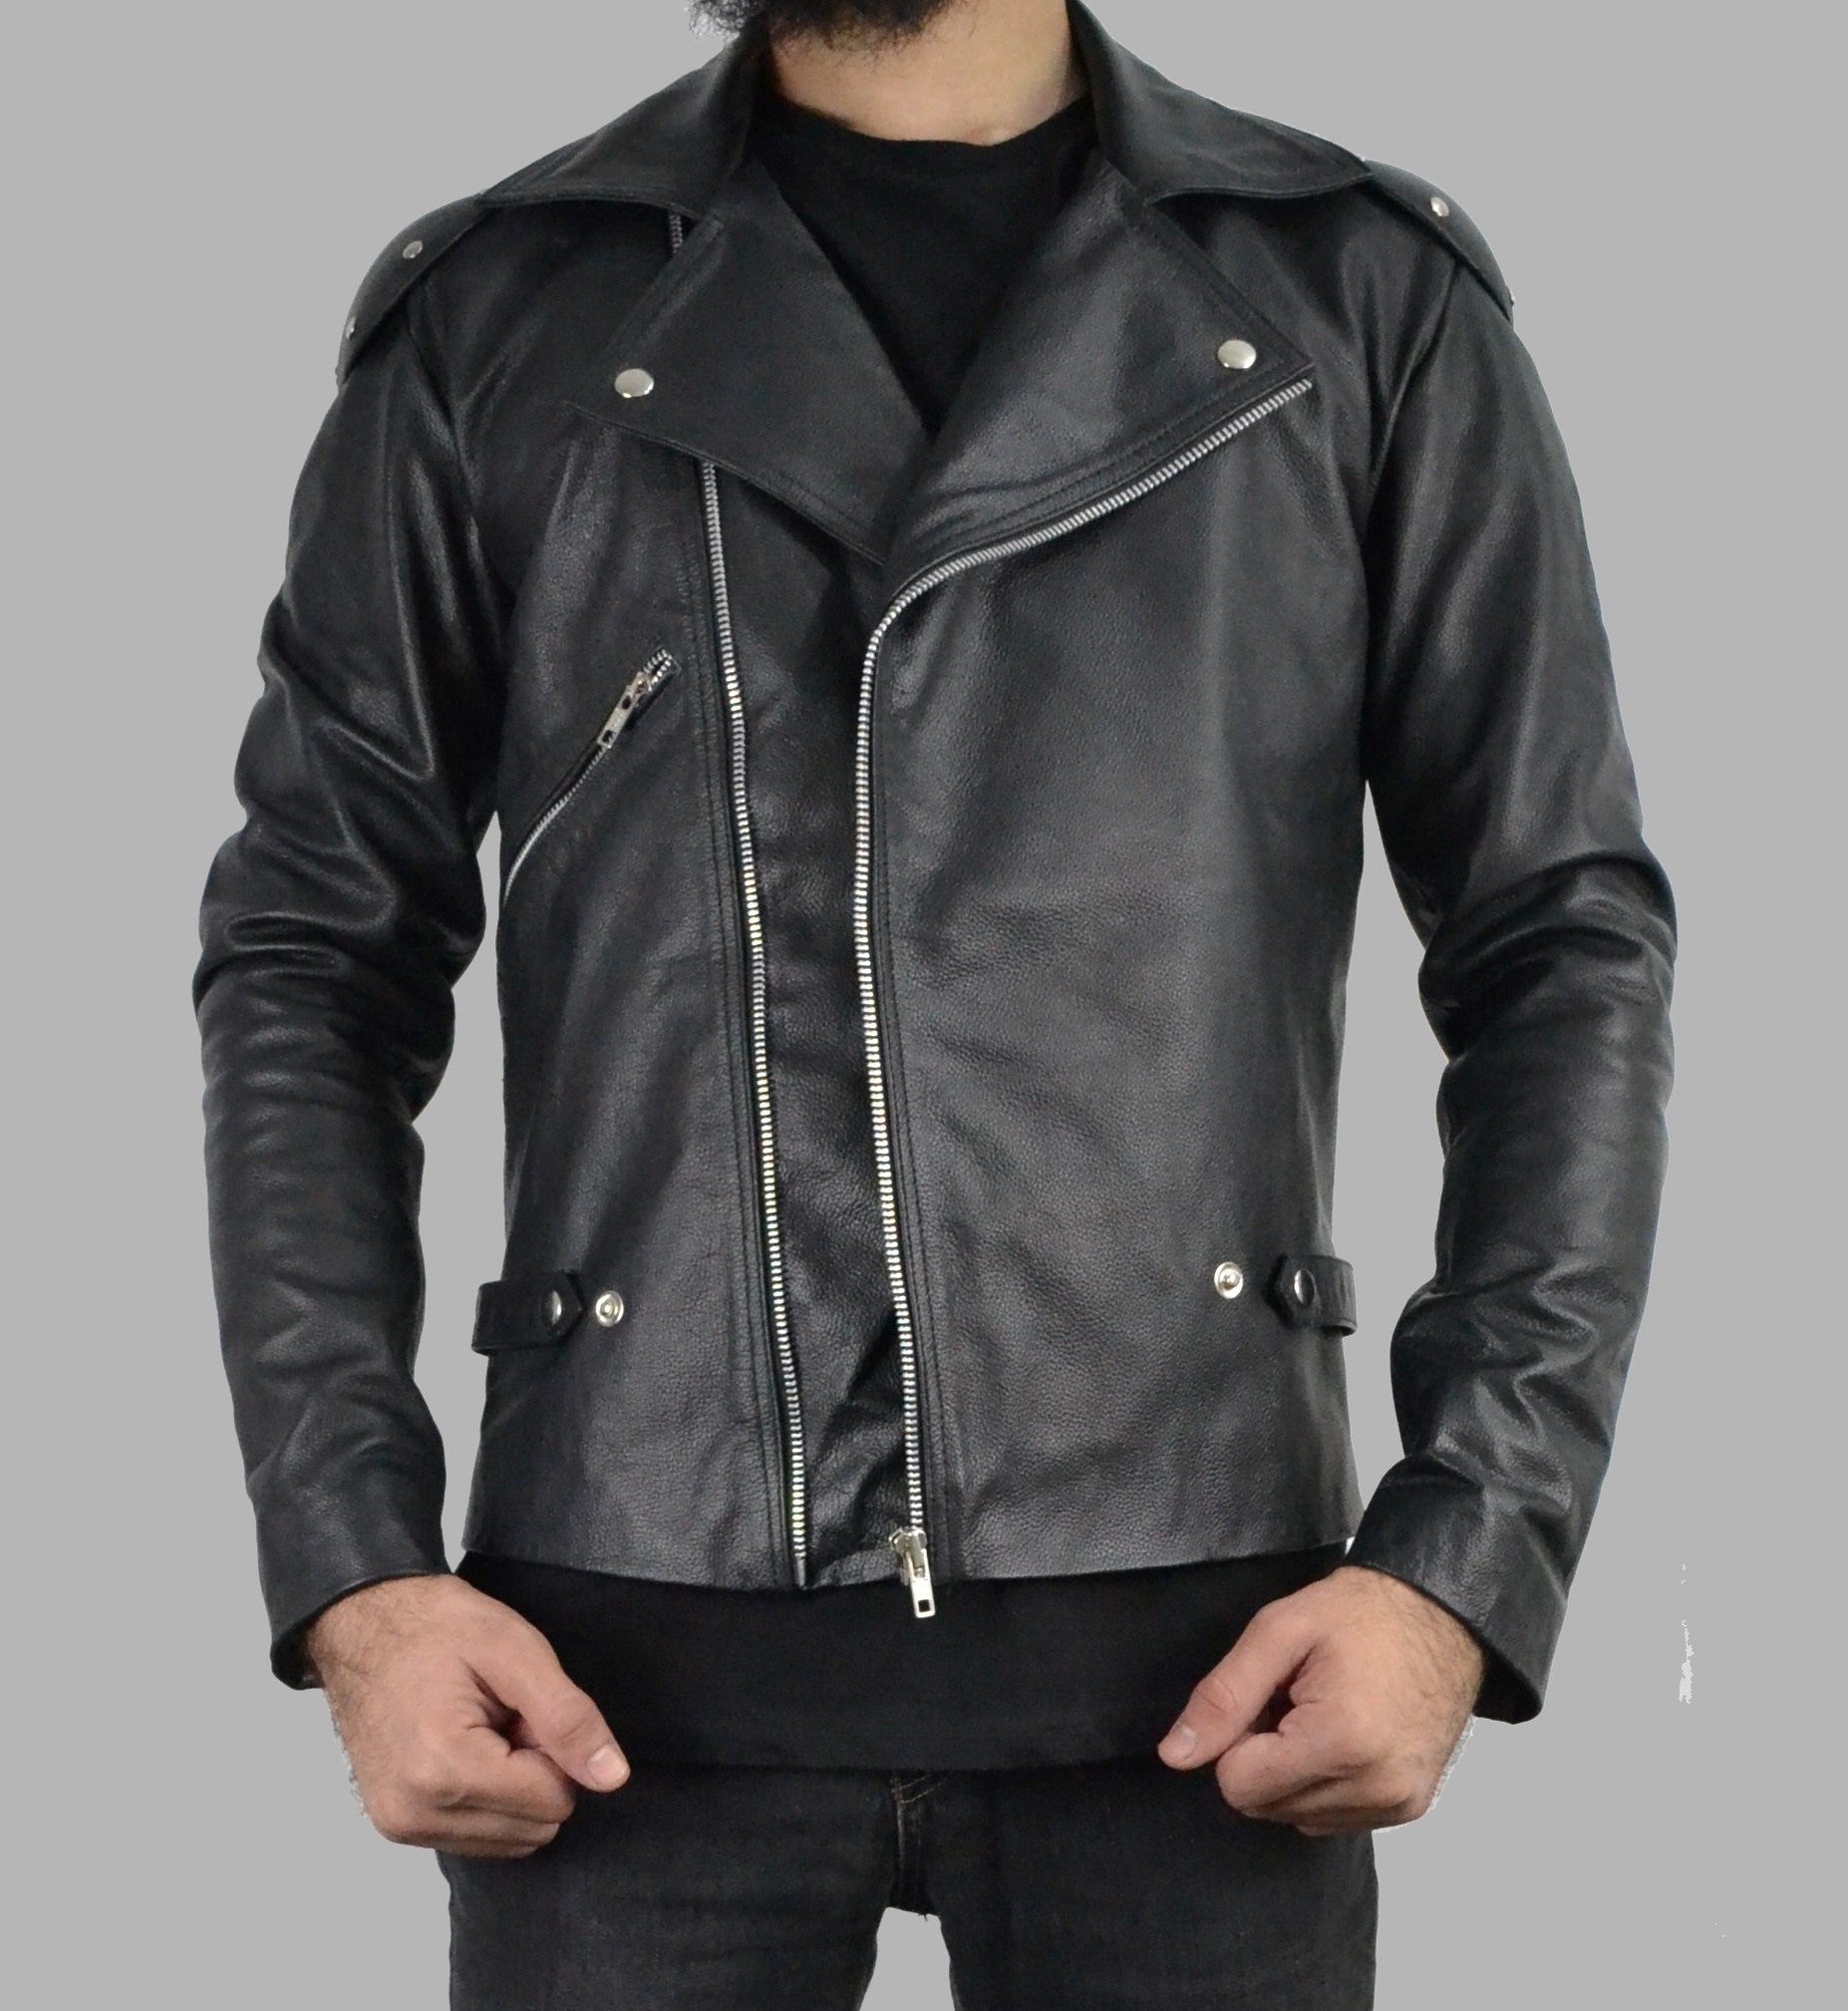 mad max style leather jacket